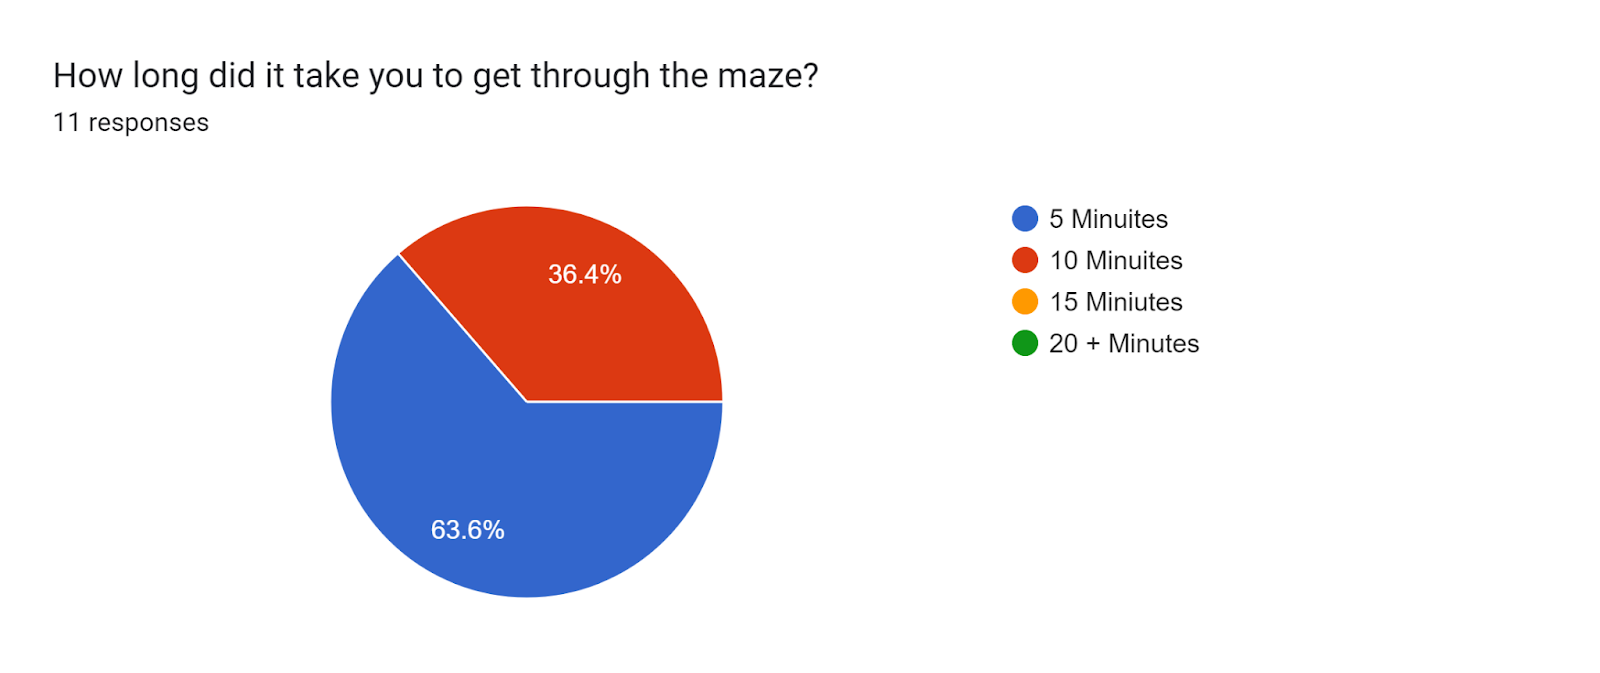 Forms response chart. Question title: How long did it take you to get through the maze?. Number of responses: 11 responses.